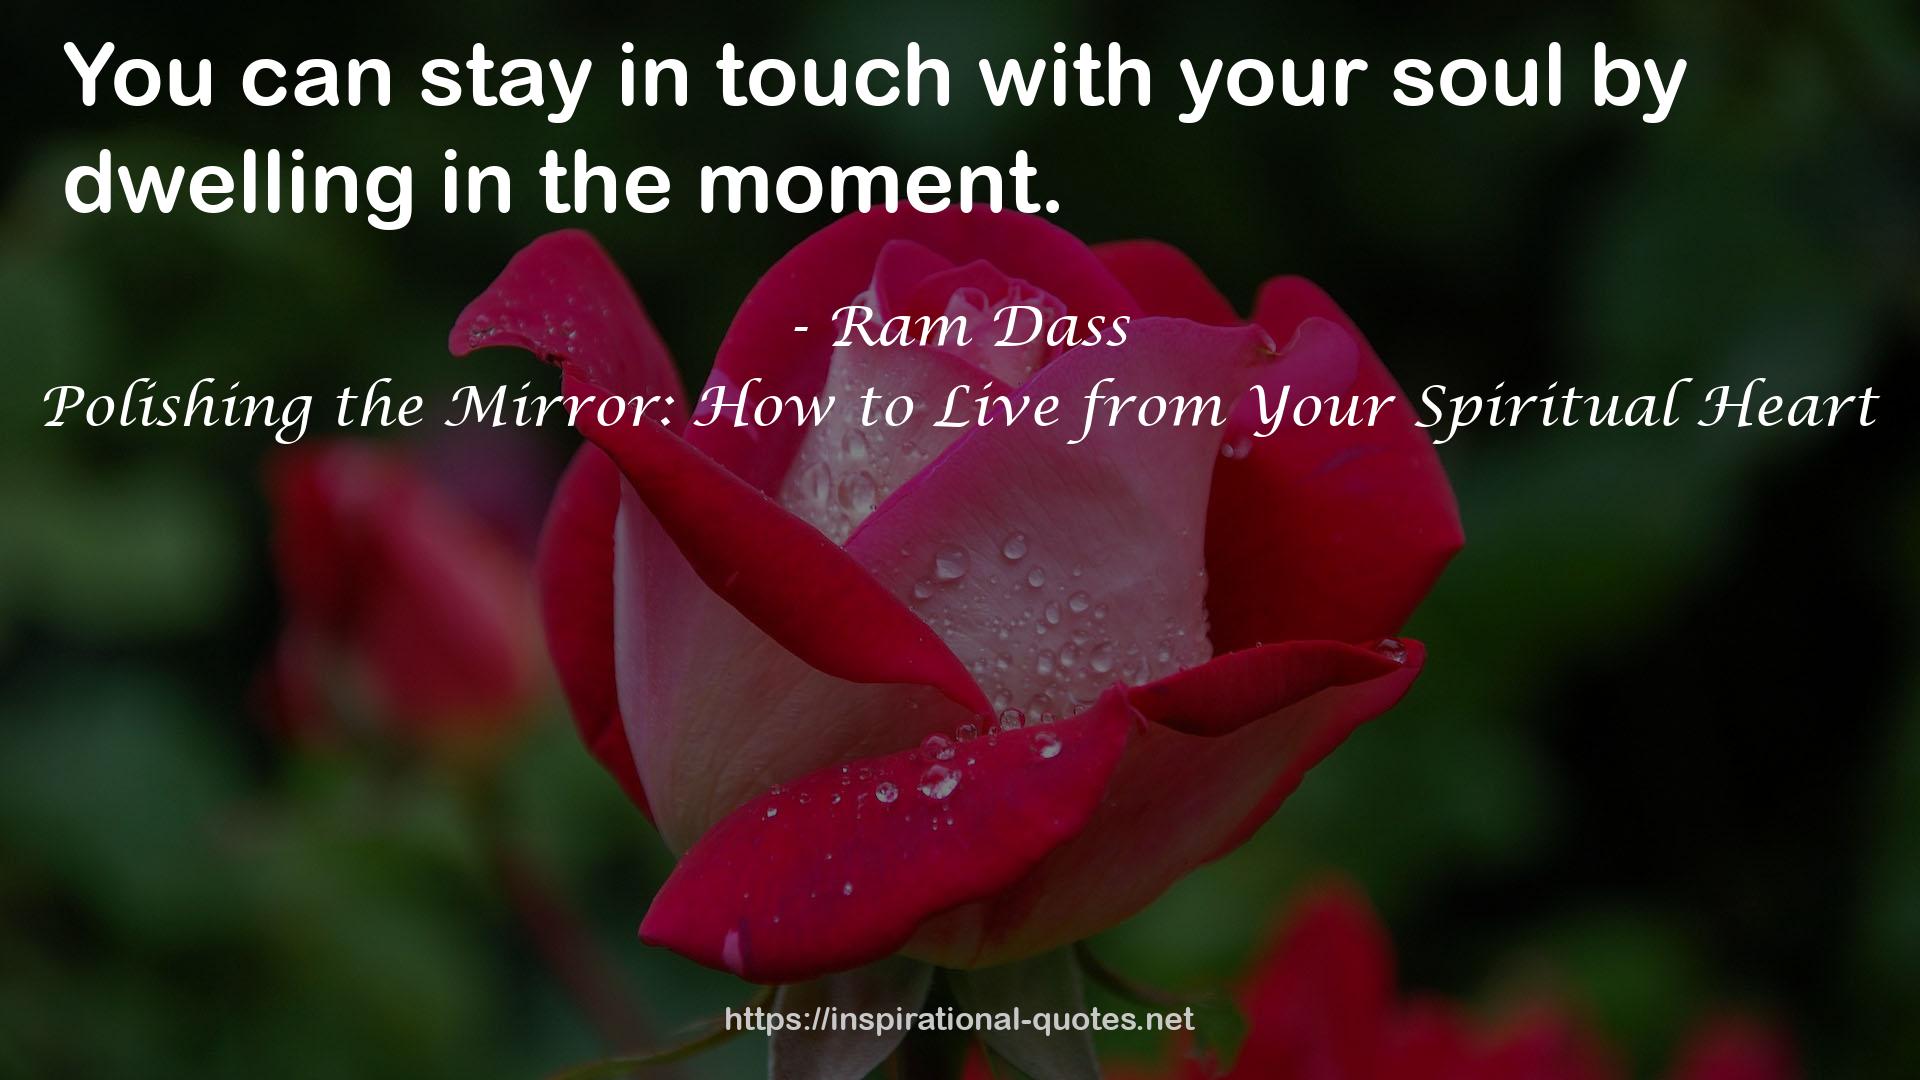 Polishing the Mirror: How to Live from Your Spiritual Heart QUOTES